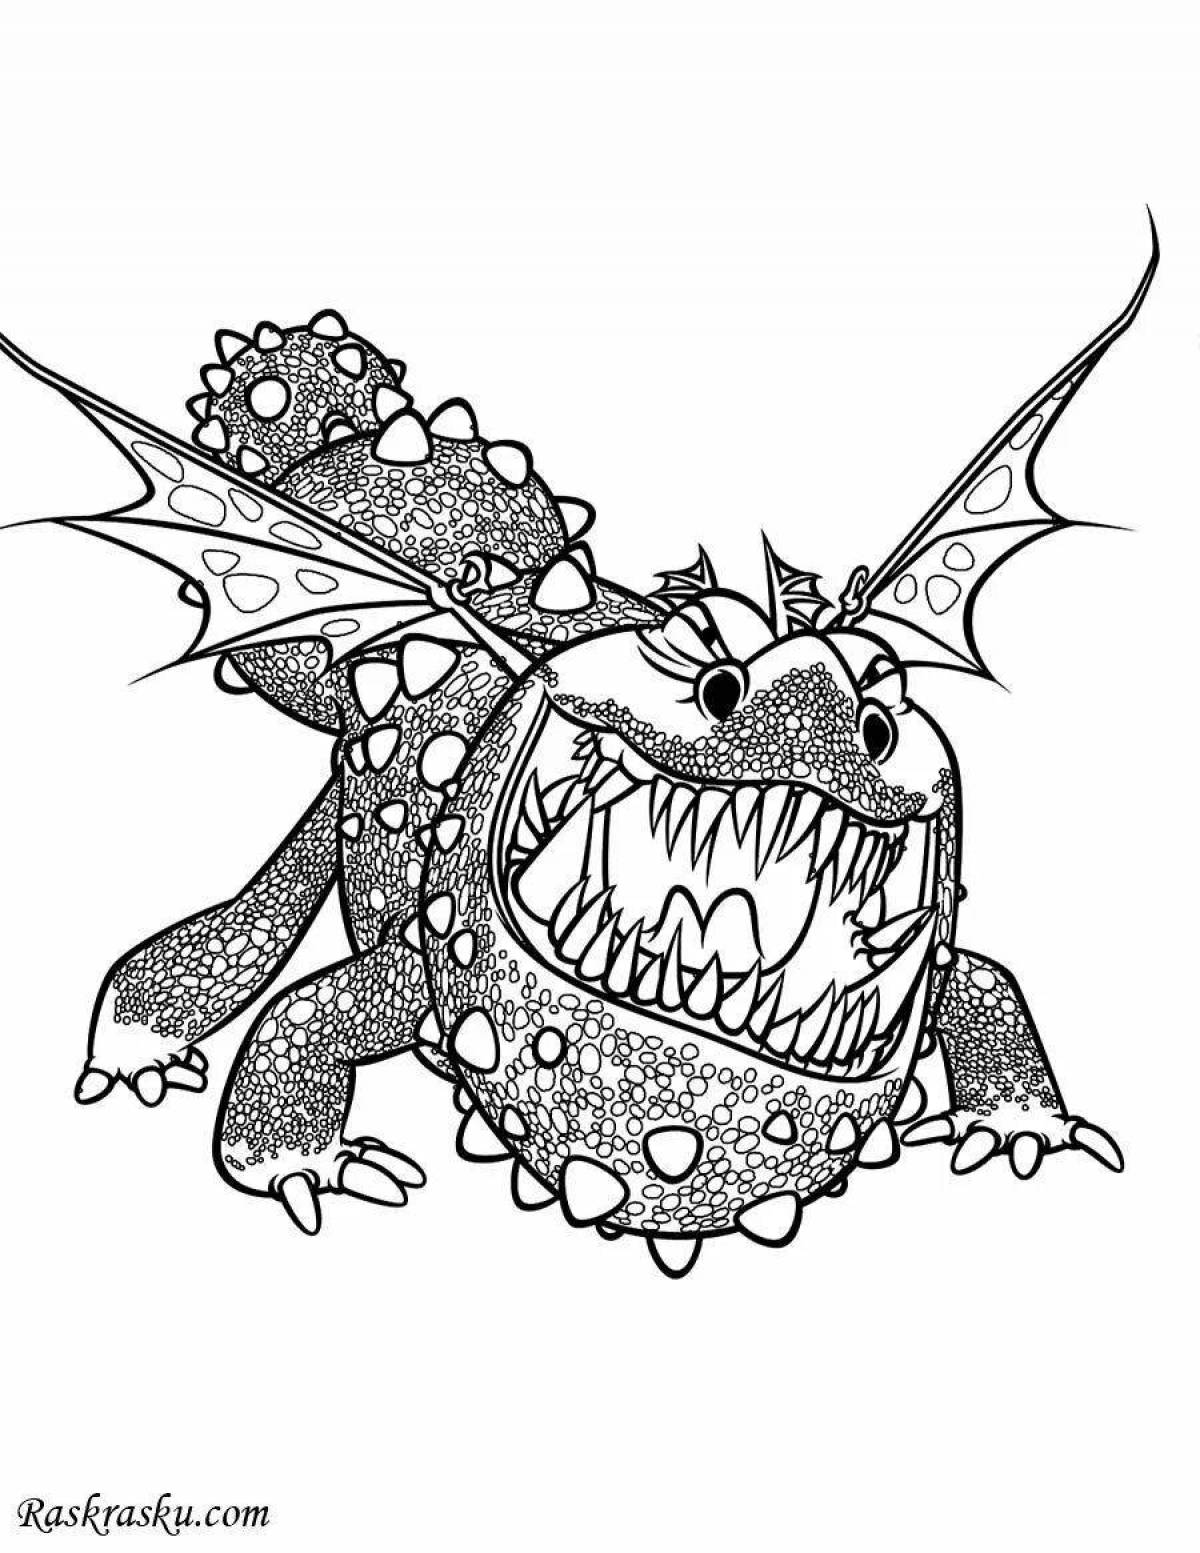 Coloring page charming cauldron how to train your dragon